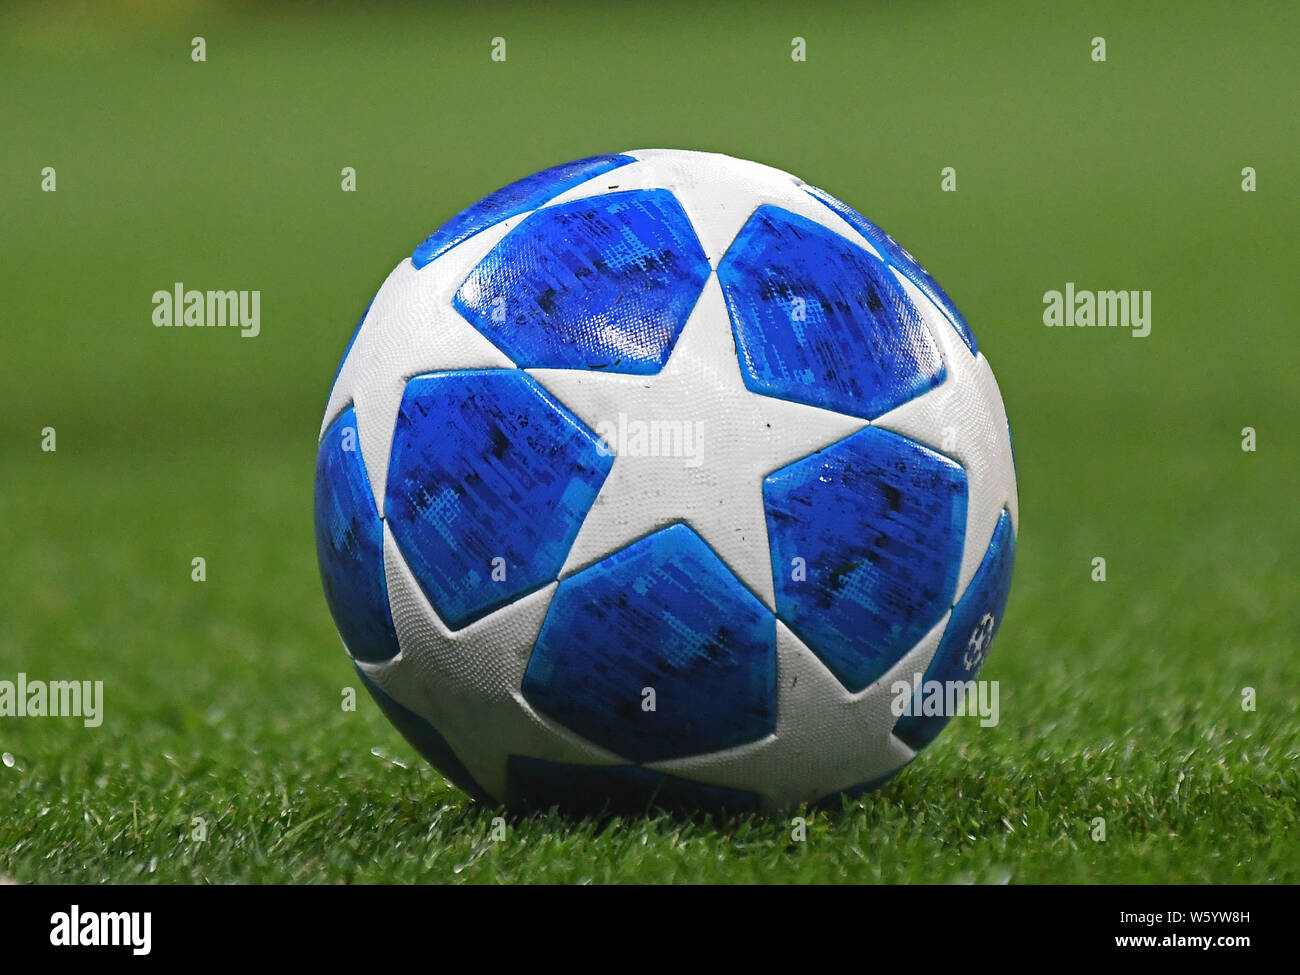 Uefa Champions League Ball High Resolution Stock Photography and Images -  Alamy